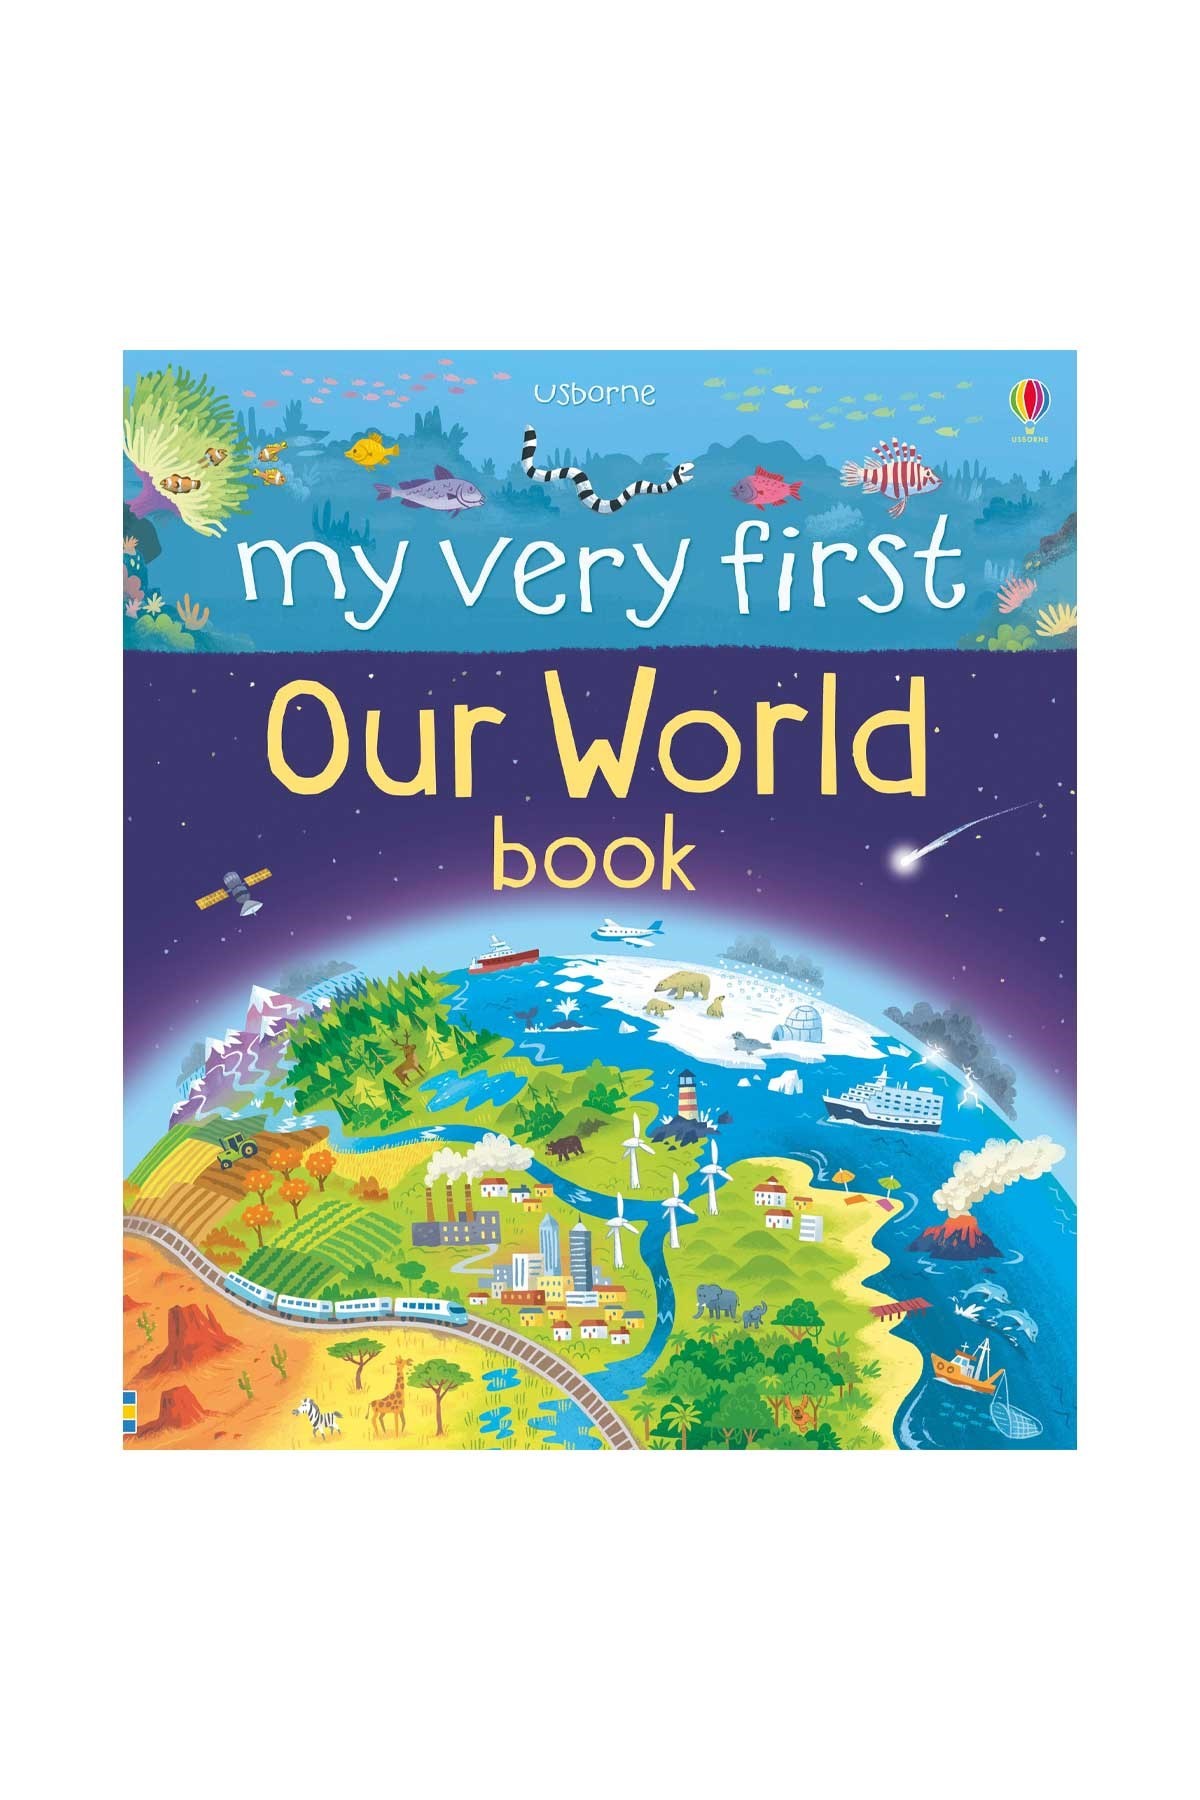 The Usborne My Very First Our World Book